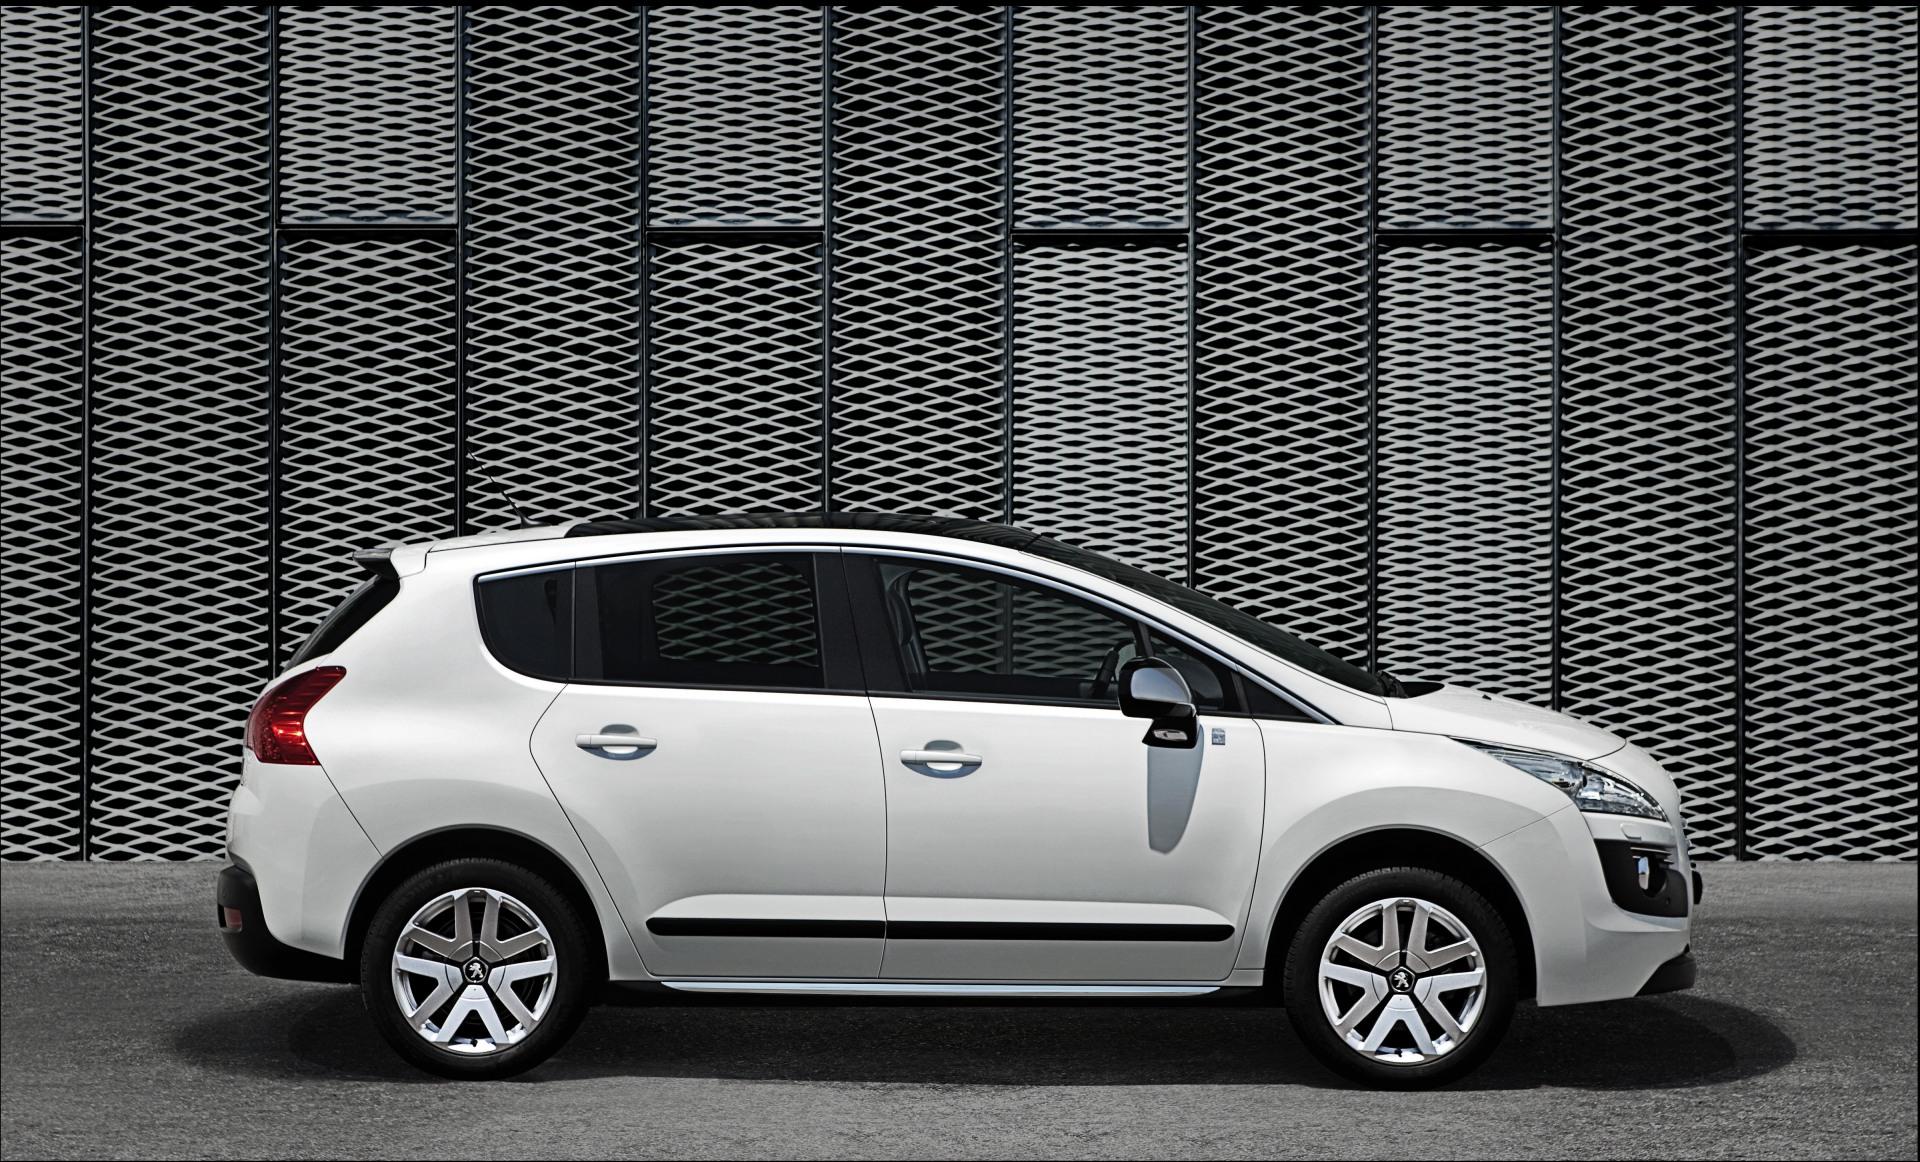 2011 Peugeot 3008 HYbrid4 News and Information